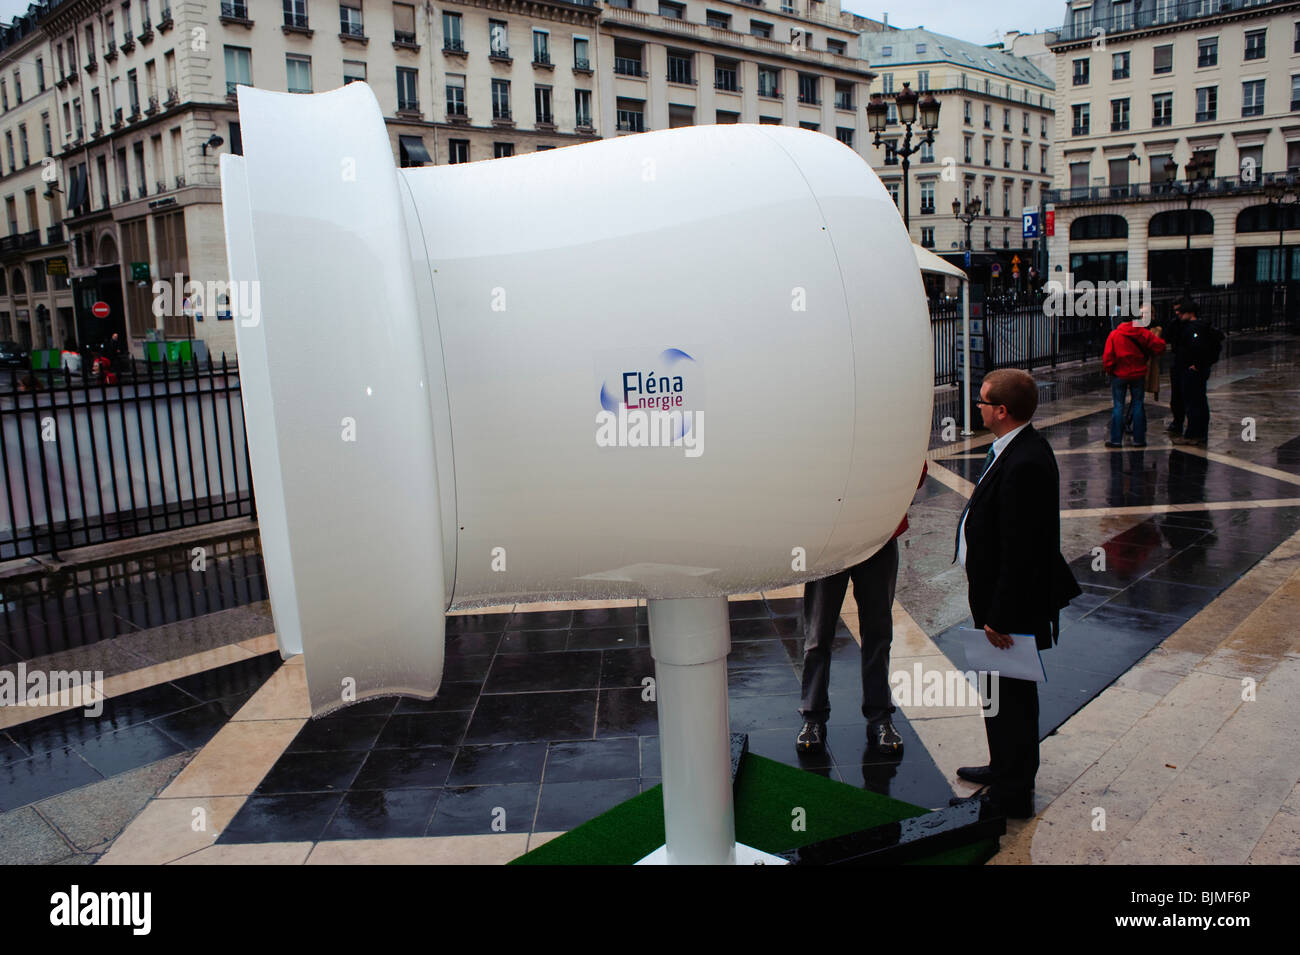 Paris, France, New Technology, Eolian Wind Turbine 'Eléna Energie', on display outside Street, global green economy concept, responsible business sustainable investing Stock Photo